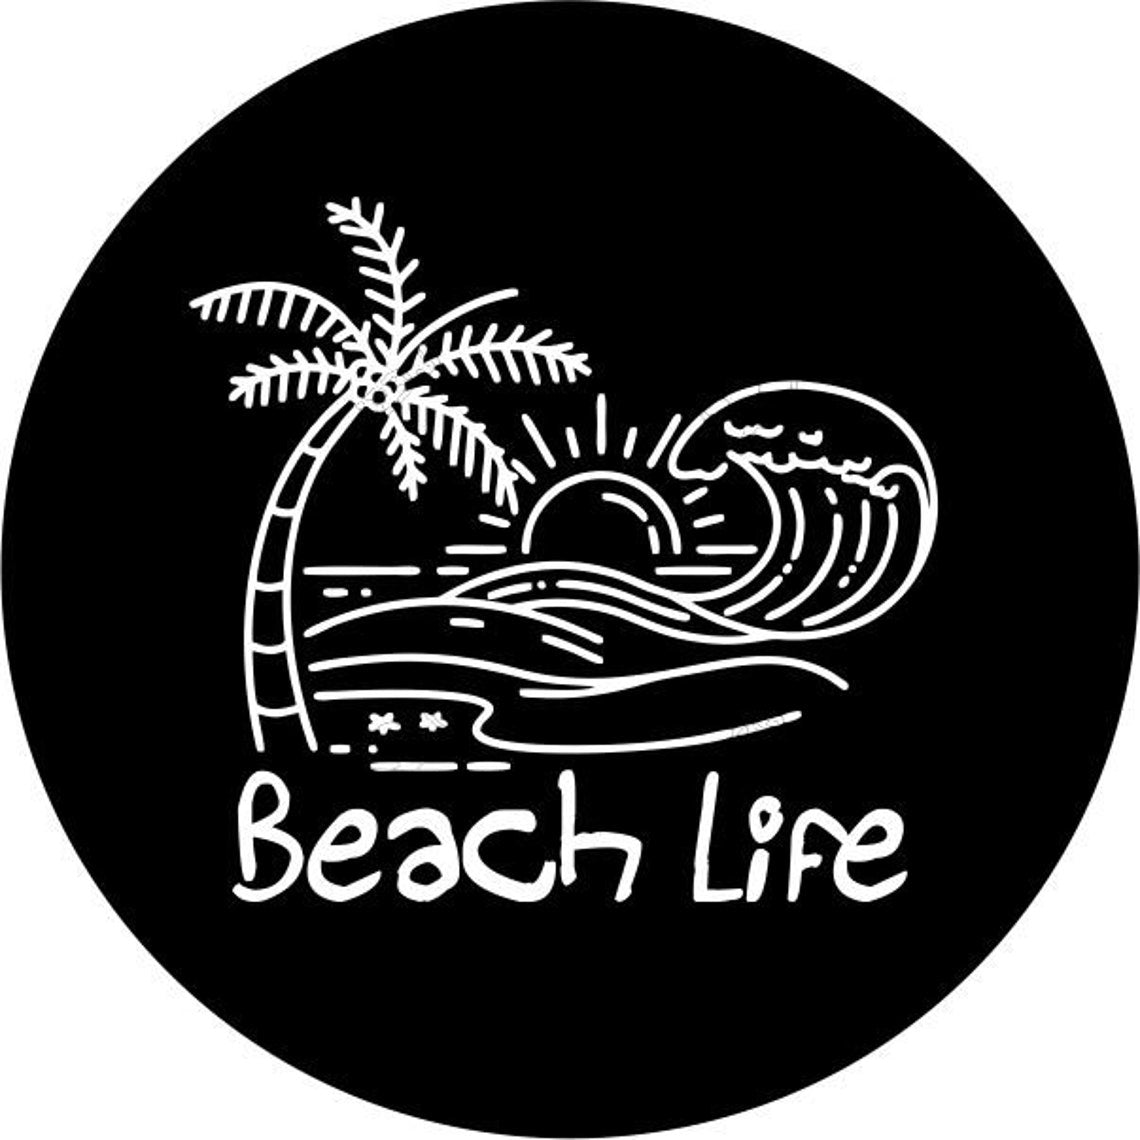 Black vinyl spare tire cover design of beach life written below a simple line graphic of a sunset beach landscape scene in white.